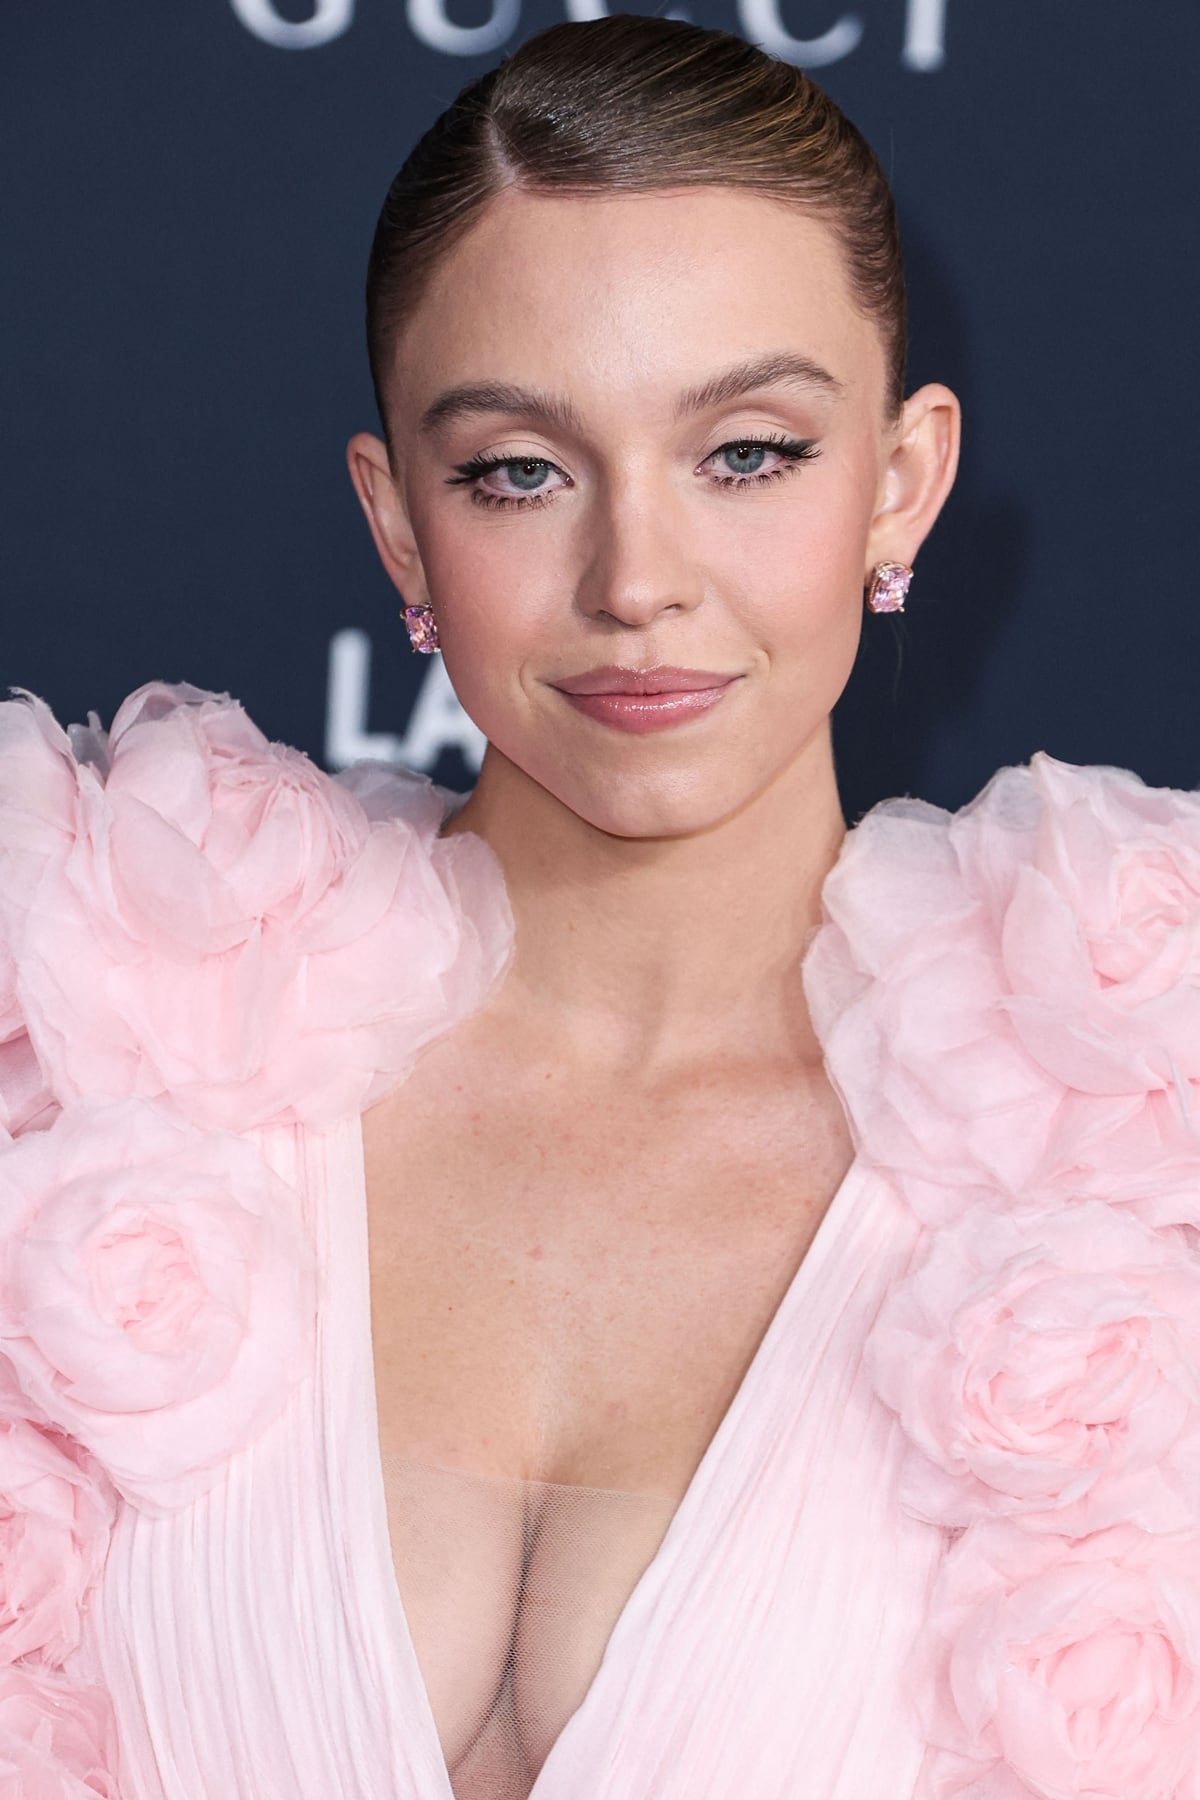 Sydney Sweeney flaunts her cleavage in a baby pink Giambattista Valli dress featuring a plunging neckline and floral organza appliqué adorned sleeves